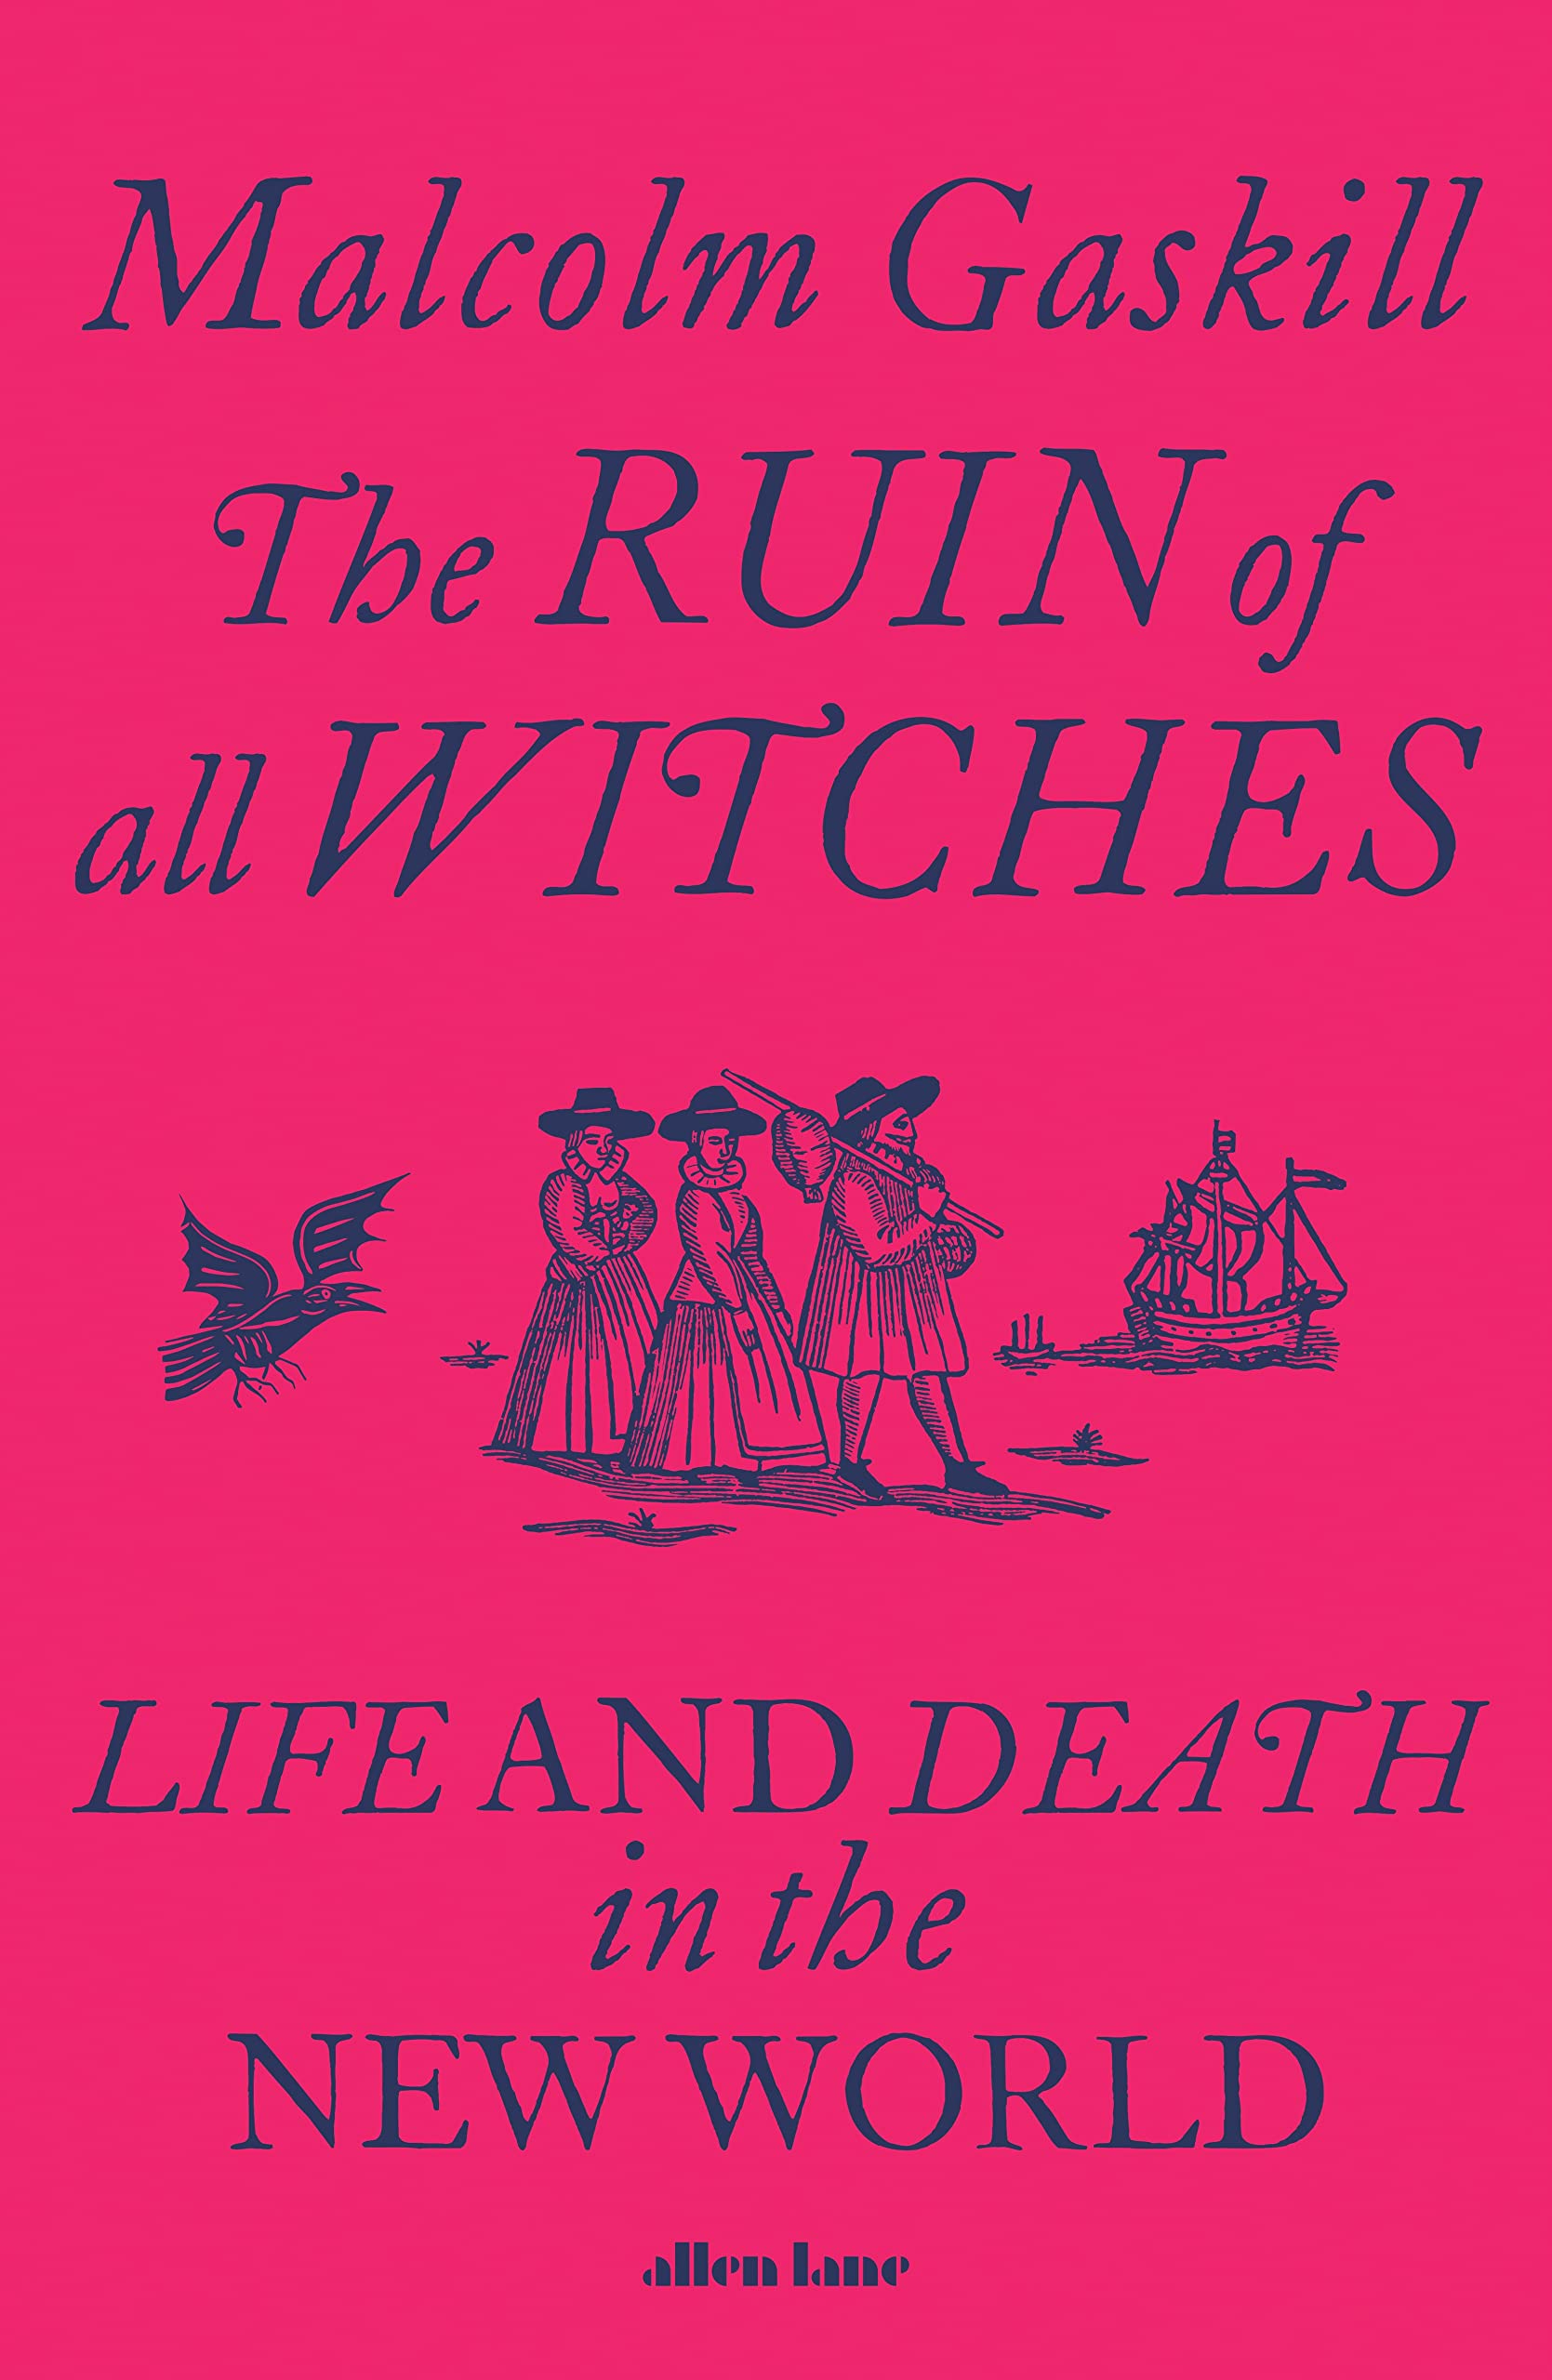 Ruin of All Witches